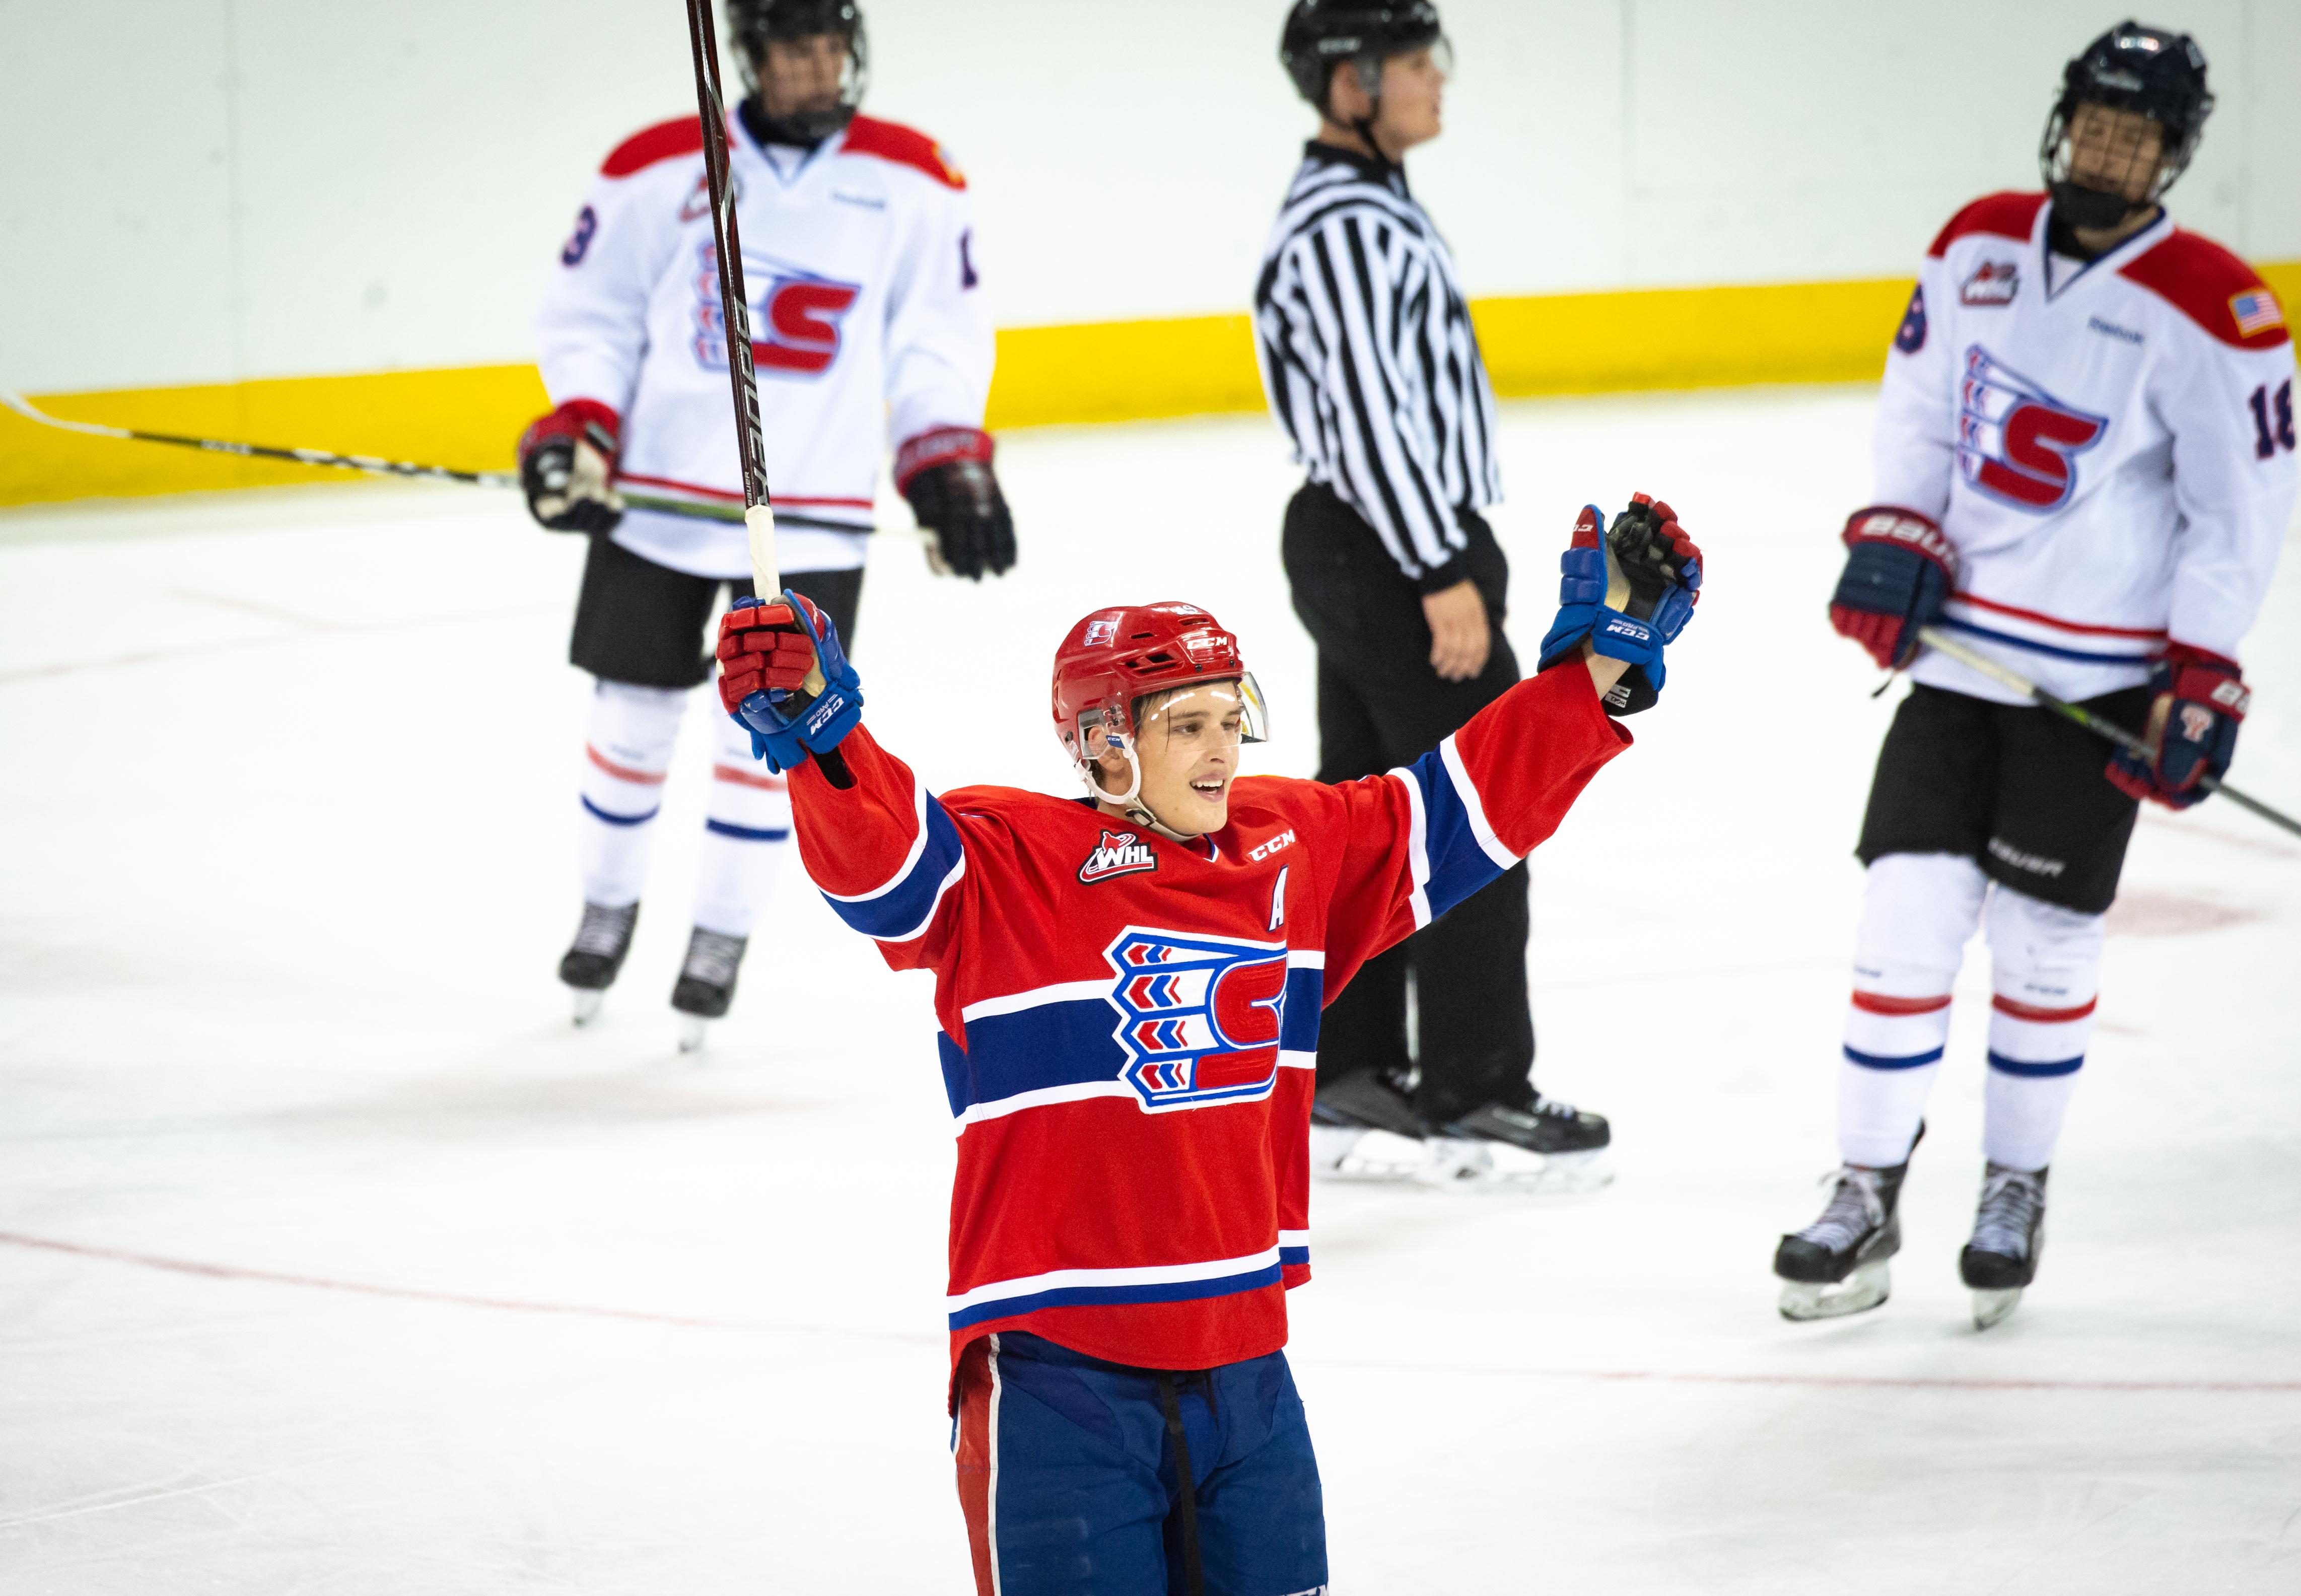 Spokane Chiefs playing the waiting game as several top prospects show